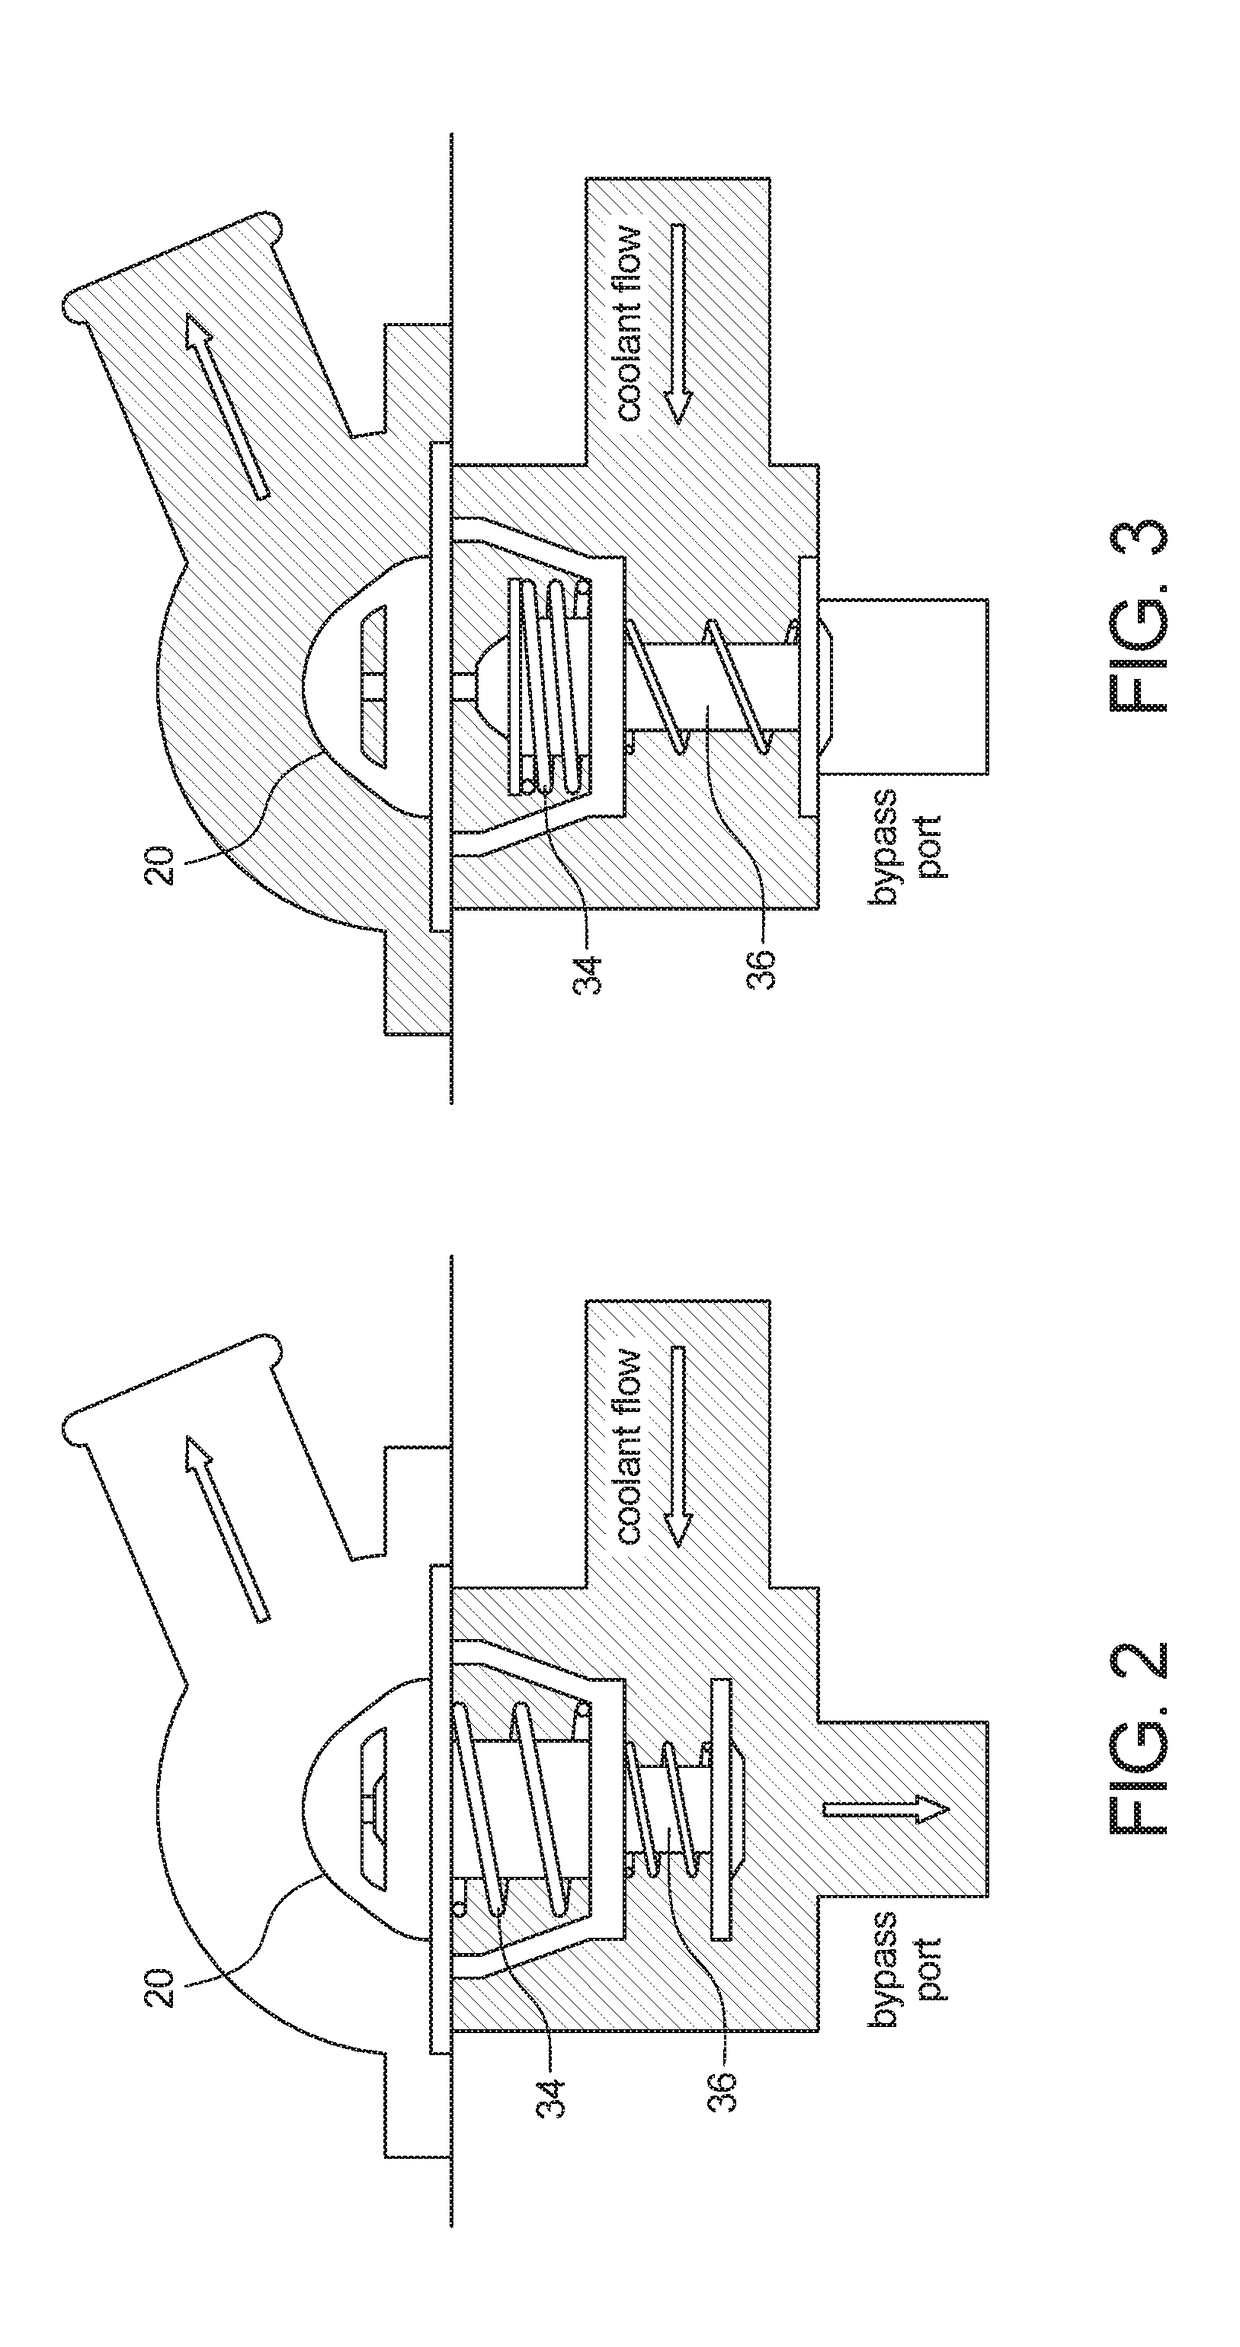 Thermostat monitoring system and method